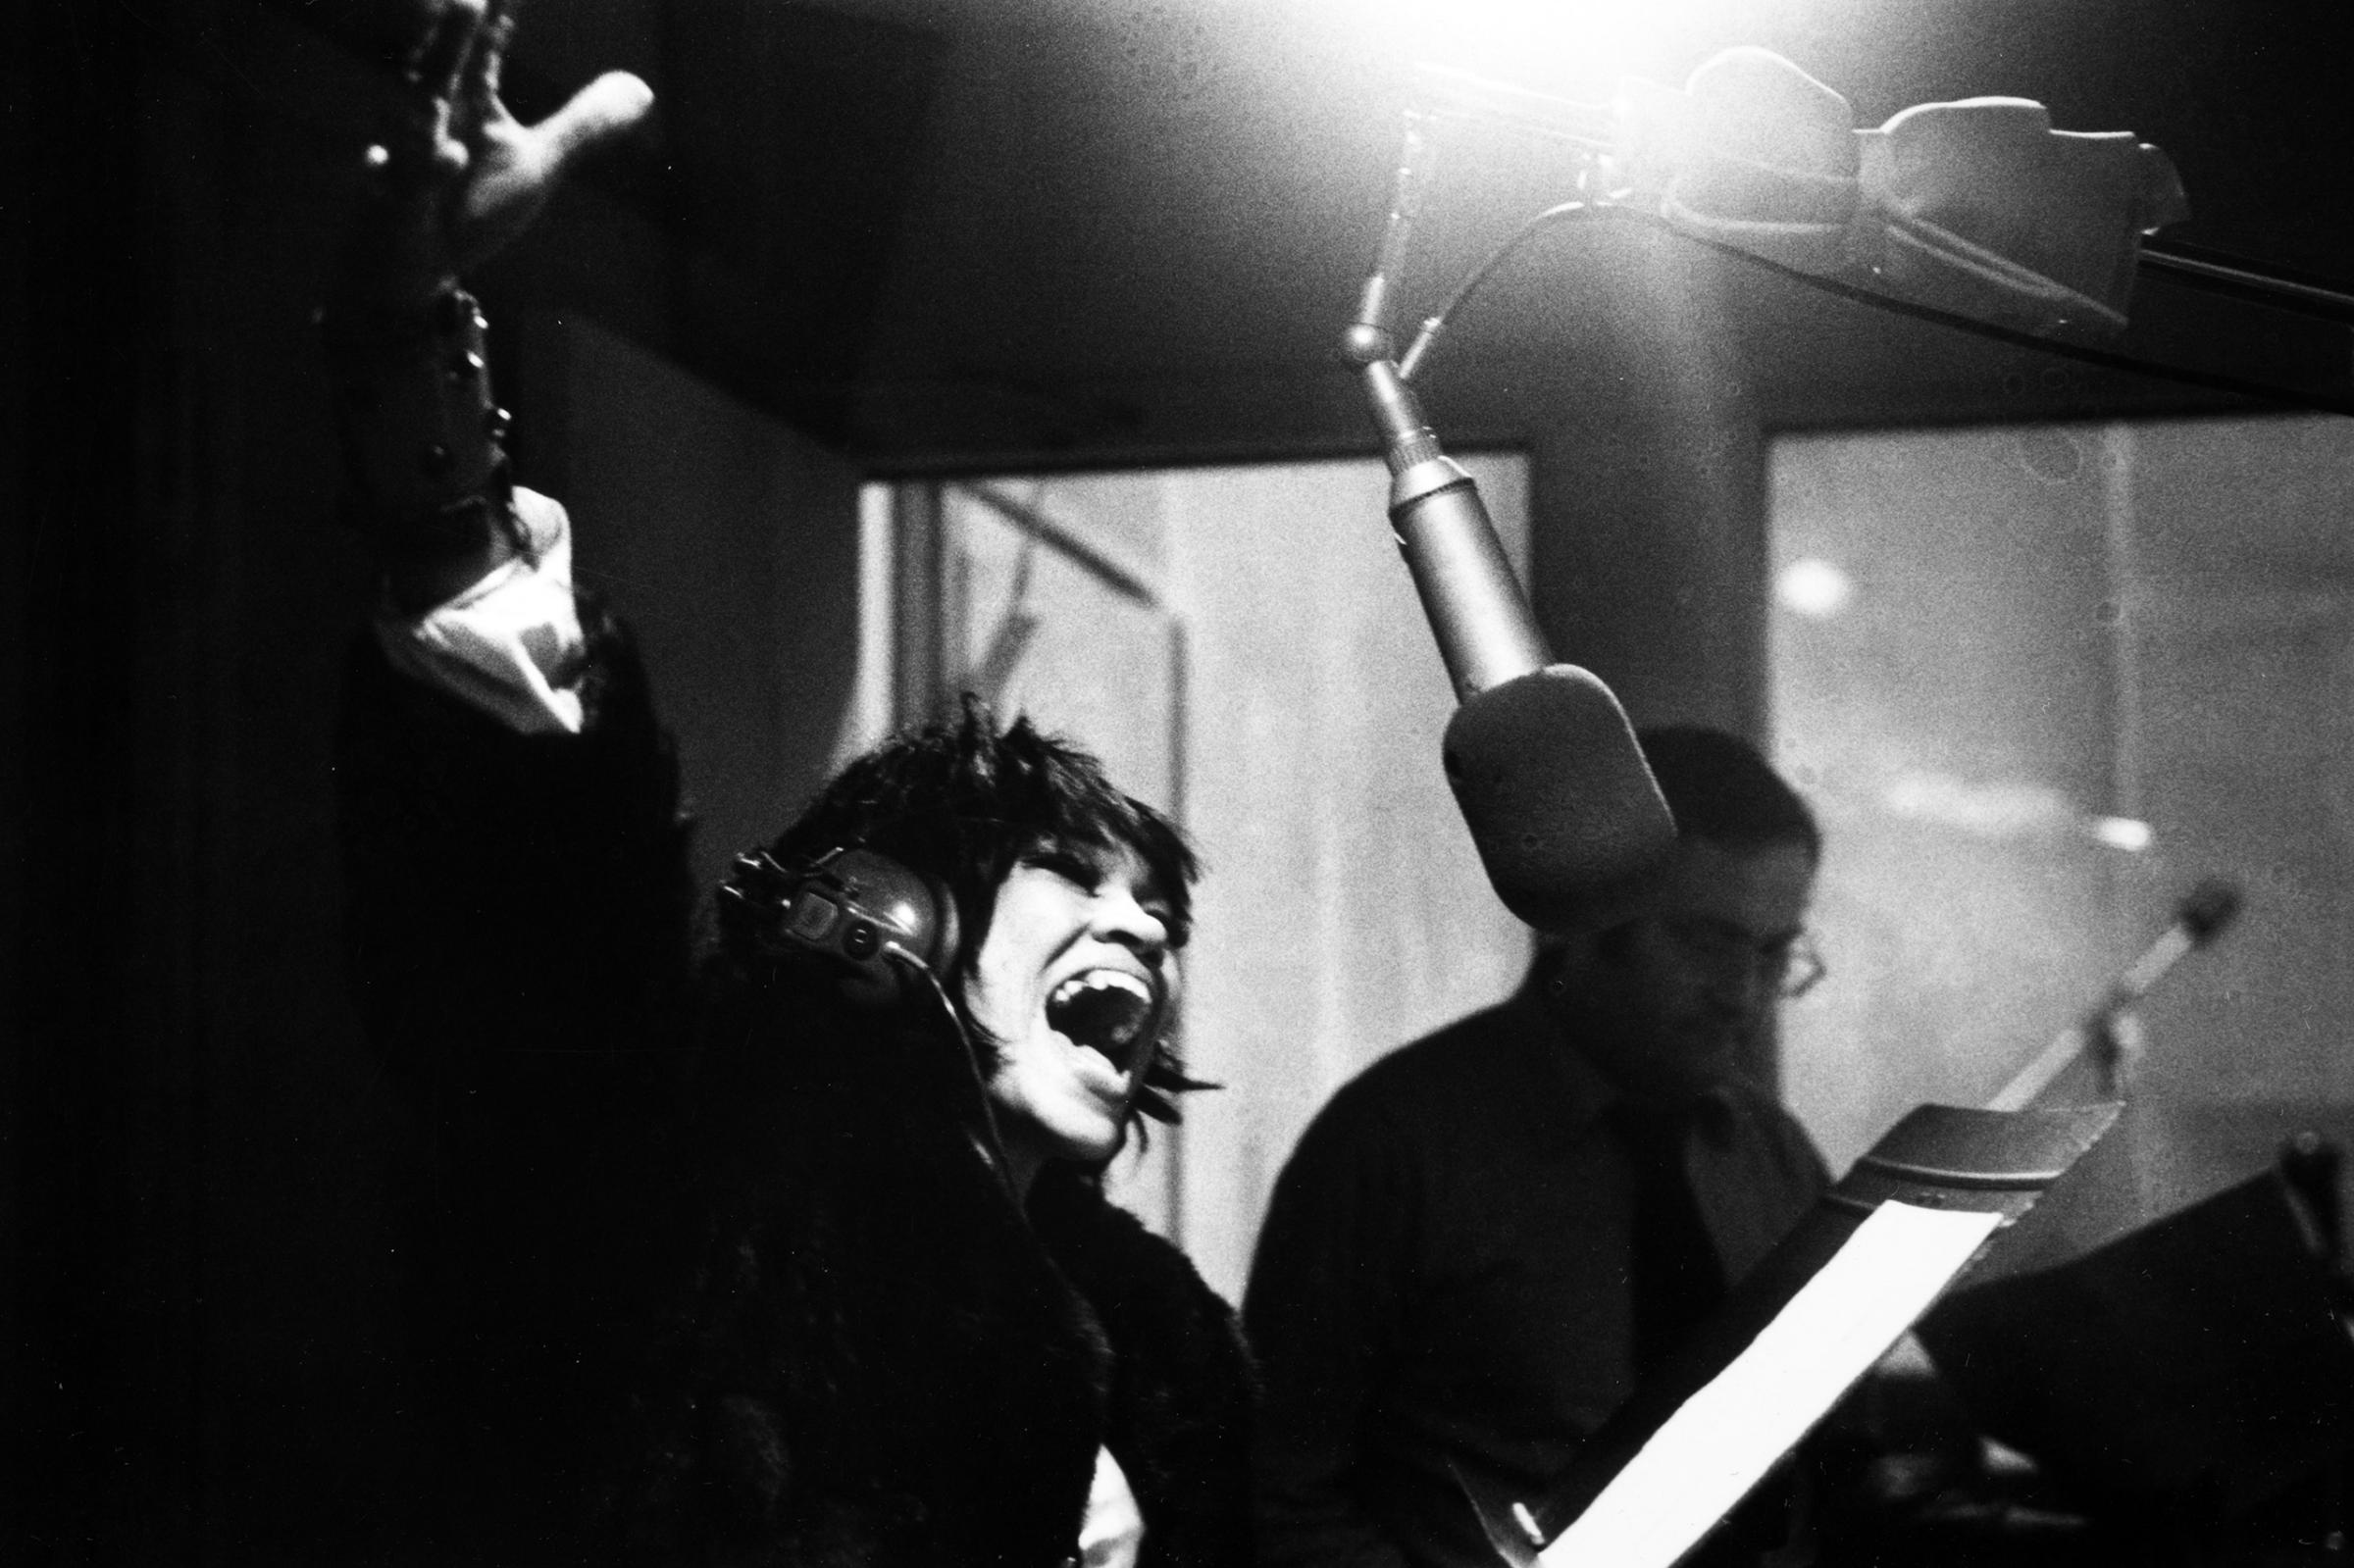 Afro-Cuban singer La Lupe in a recording studio in New York.